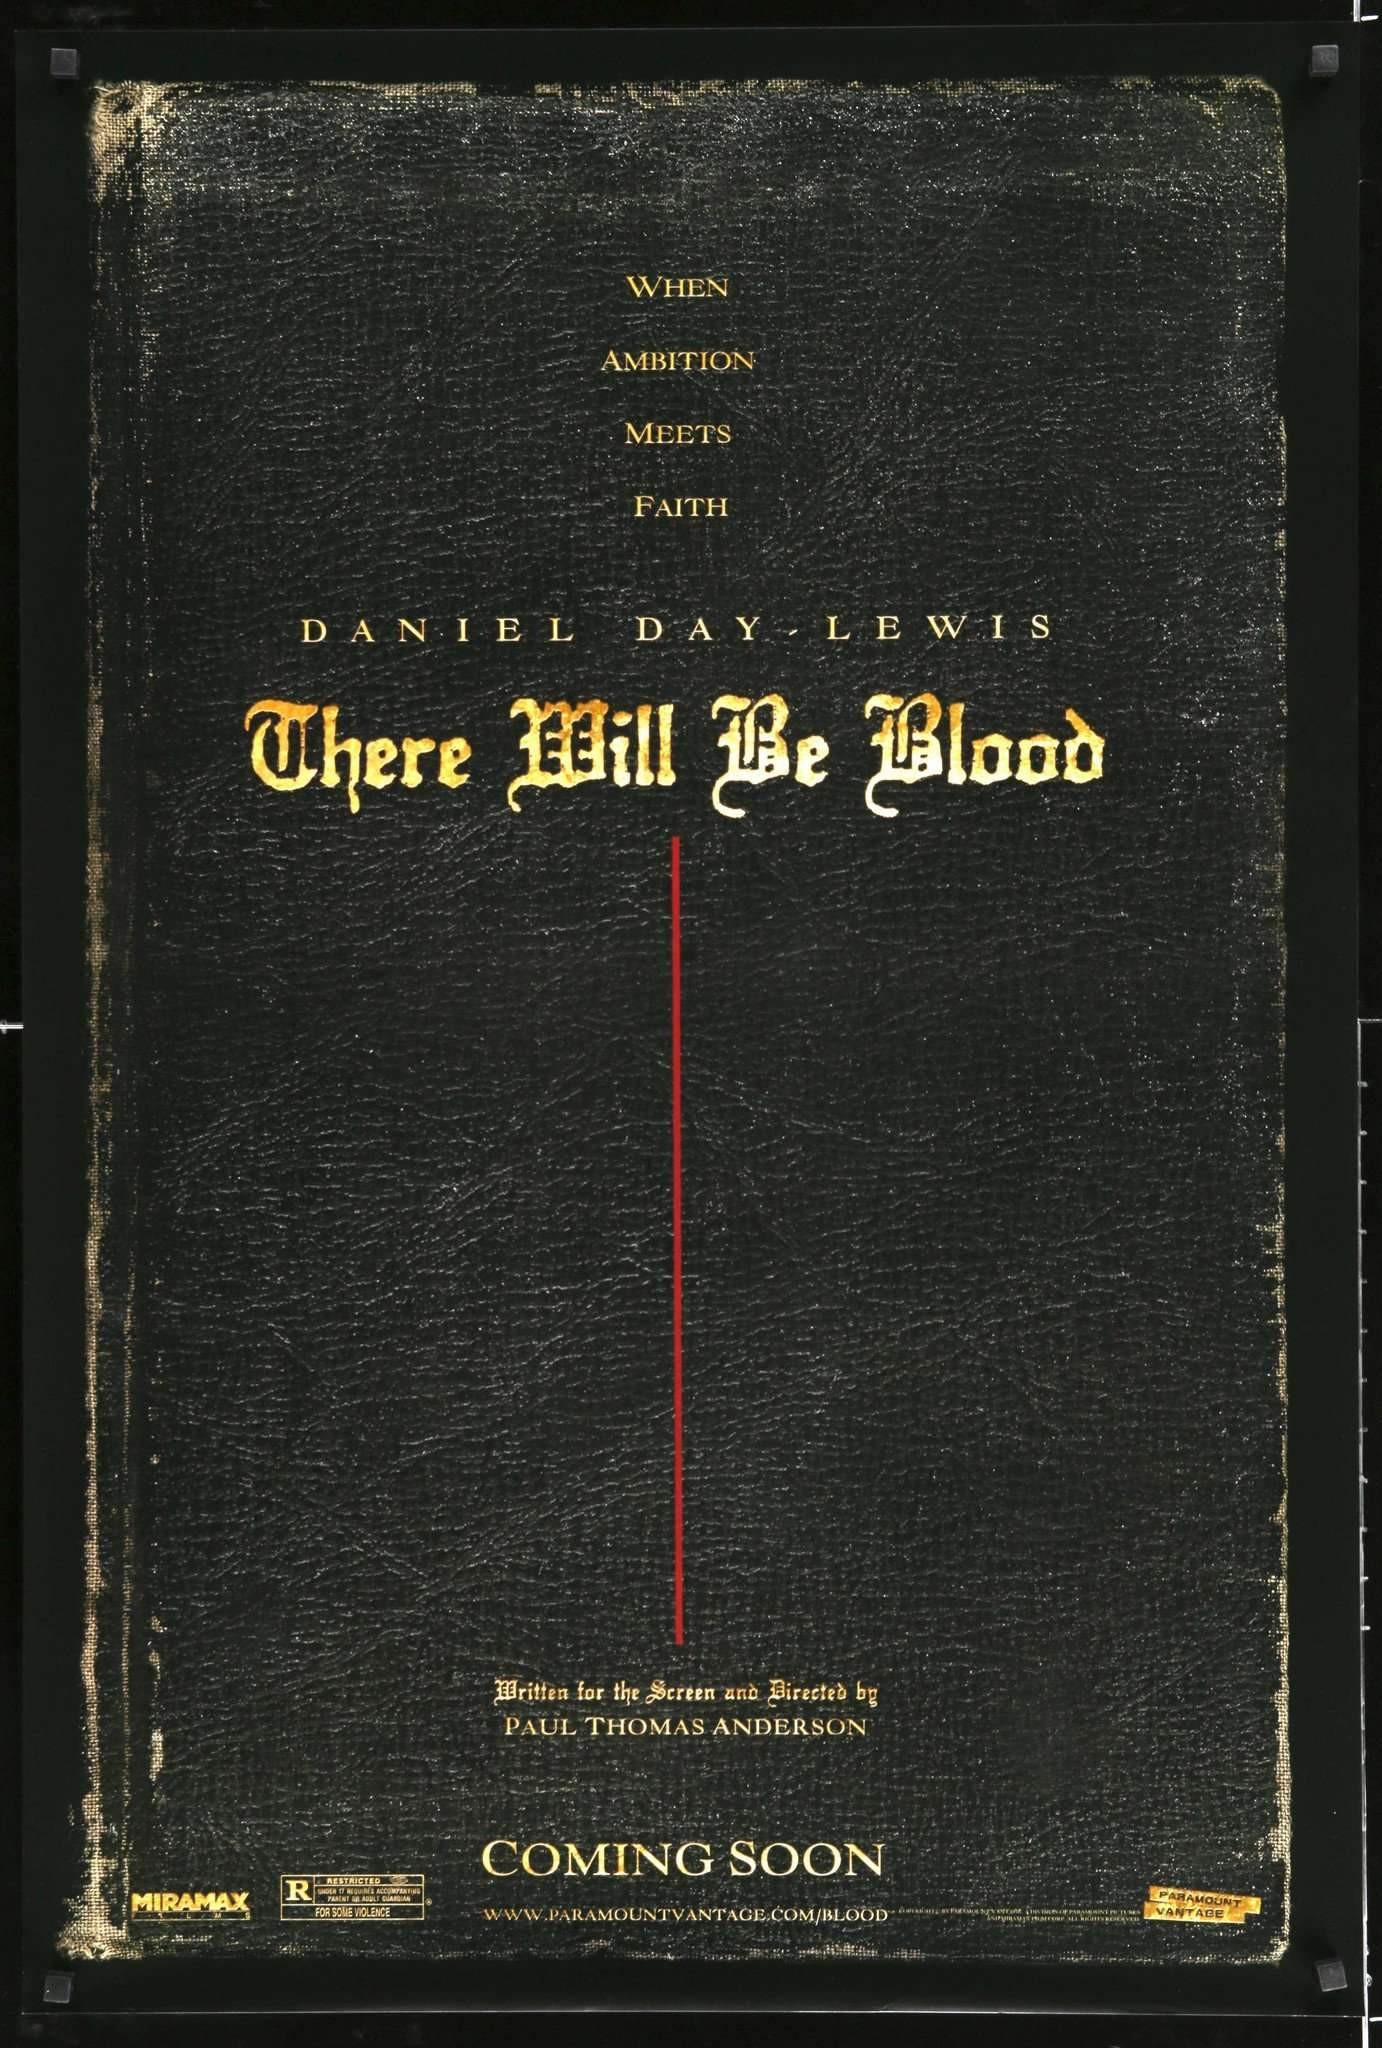 THERE WILL BE BLOOD